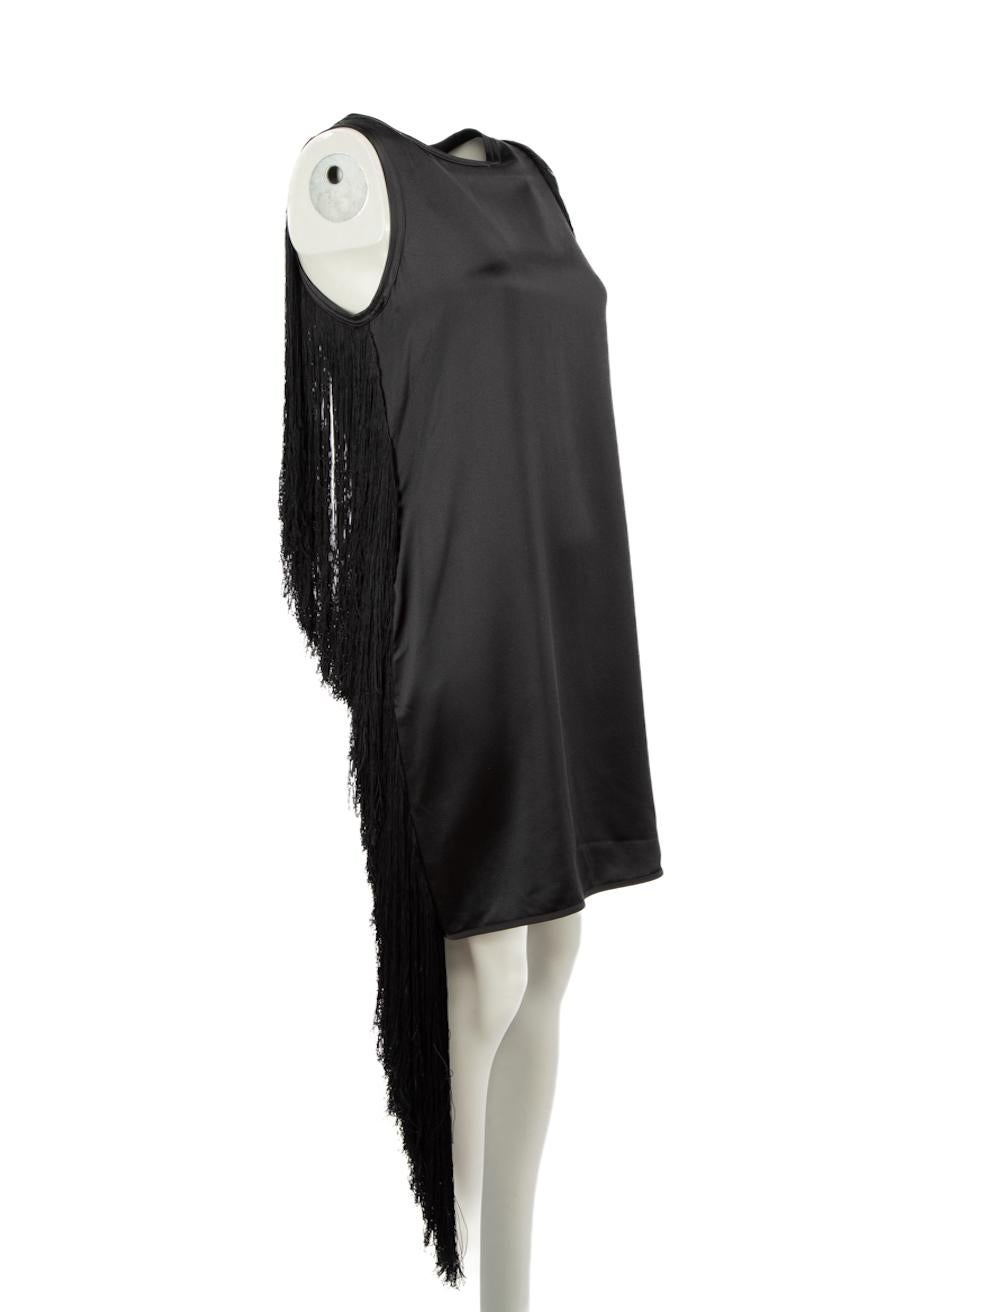 CONDITION is Never worn, with tags. No visible wear to dress is evident on this new Helmut Lang designer resale item.

Details
Black
Silk
Mini dress
Rund neck
Sleeveless
Side and shoulder fringe detail
Back zip and hook fastening
Made in China